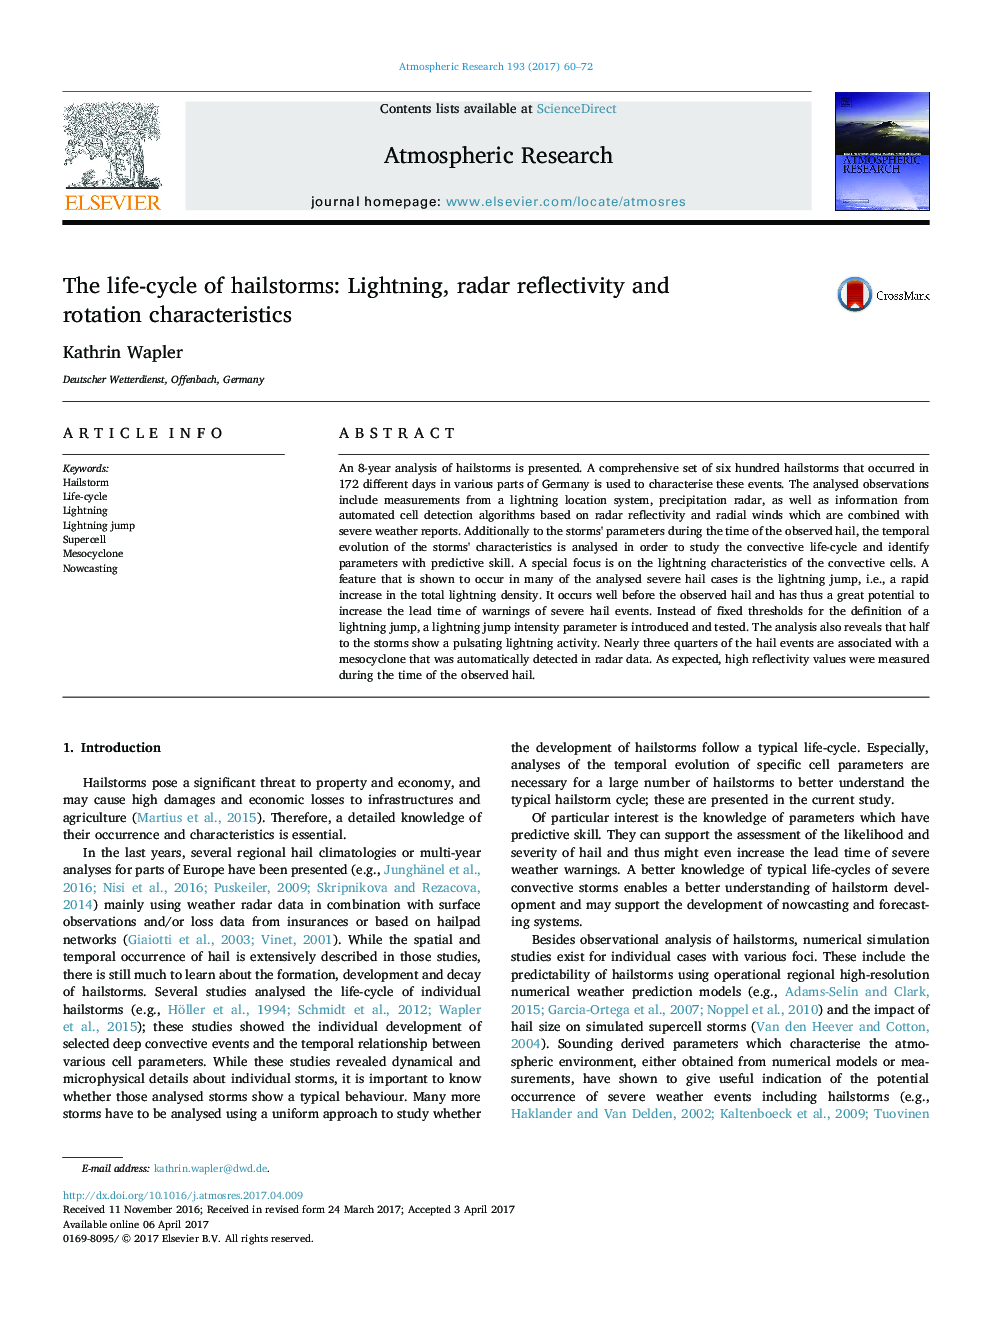 The life-cycle of hailstorms: Lightning, radar reflectivity and rotationÂ characteristics